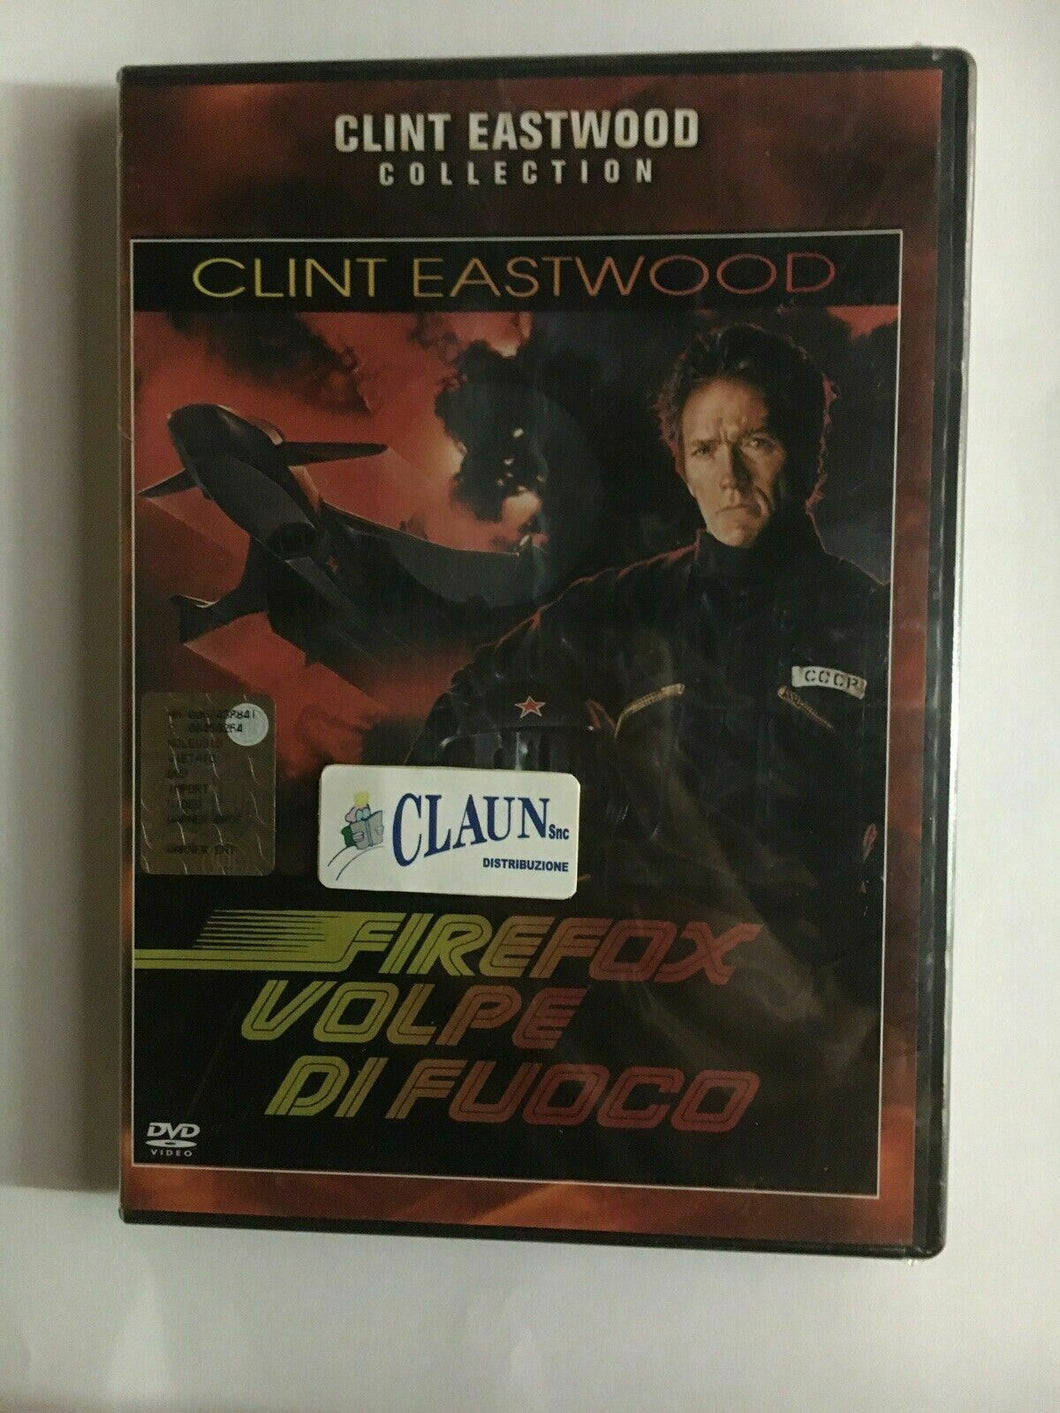 FIREFOX - VOLPE DI FUOCO Dvd- Clint Eastwood - 1982 - WARNER BROS Z8 - DVD NUOVO